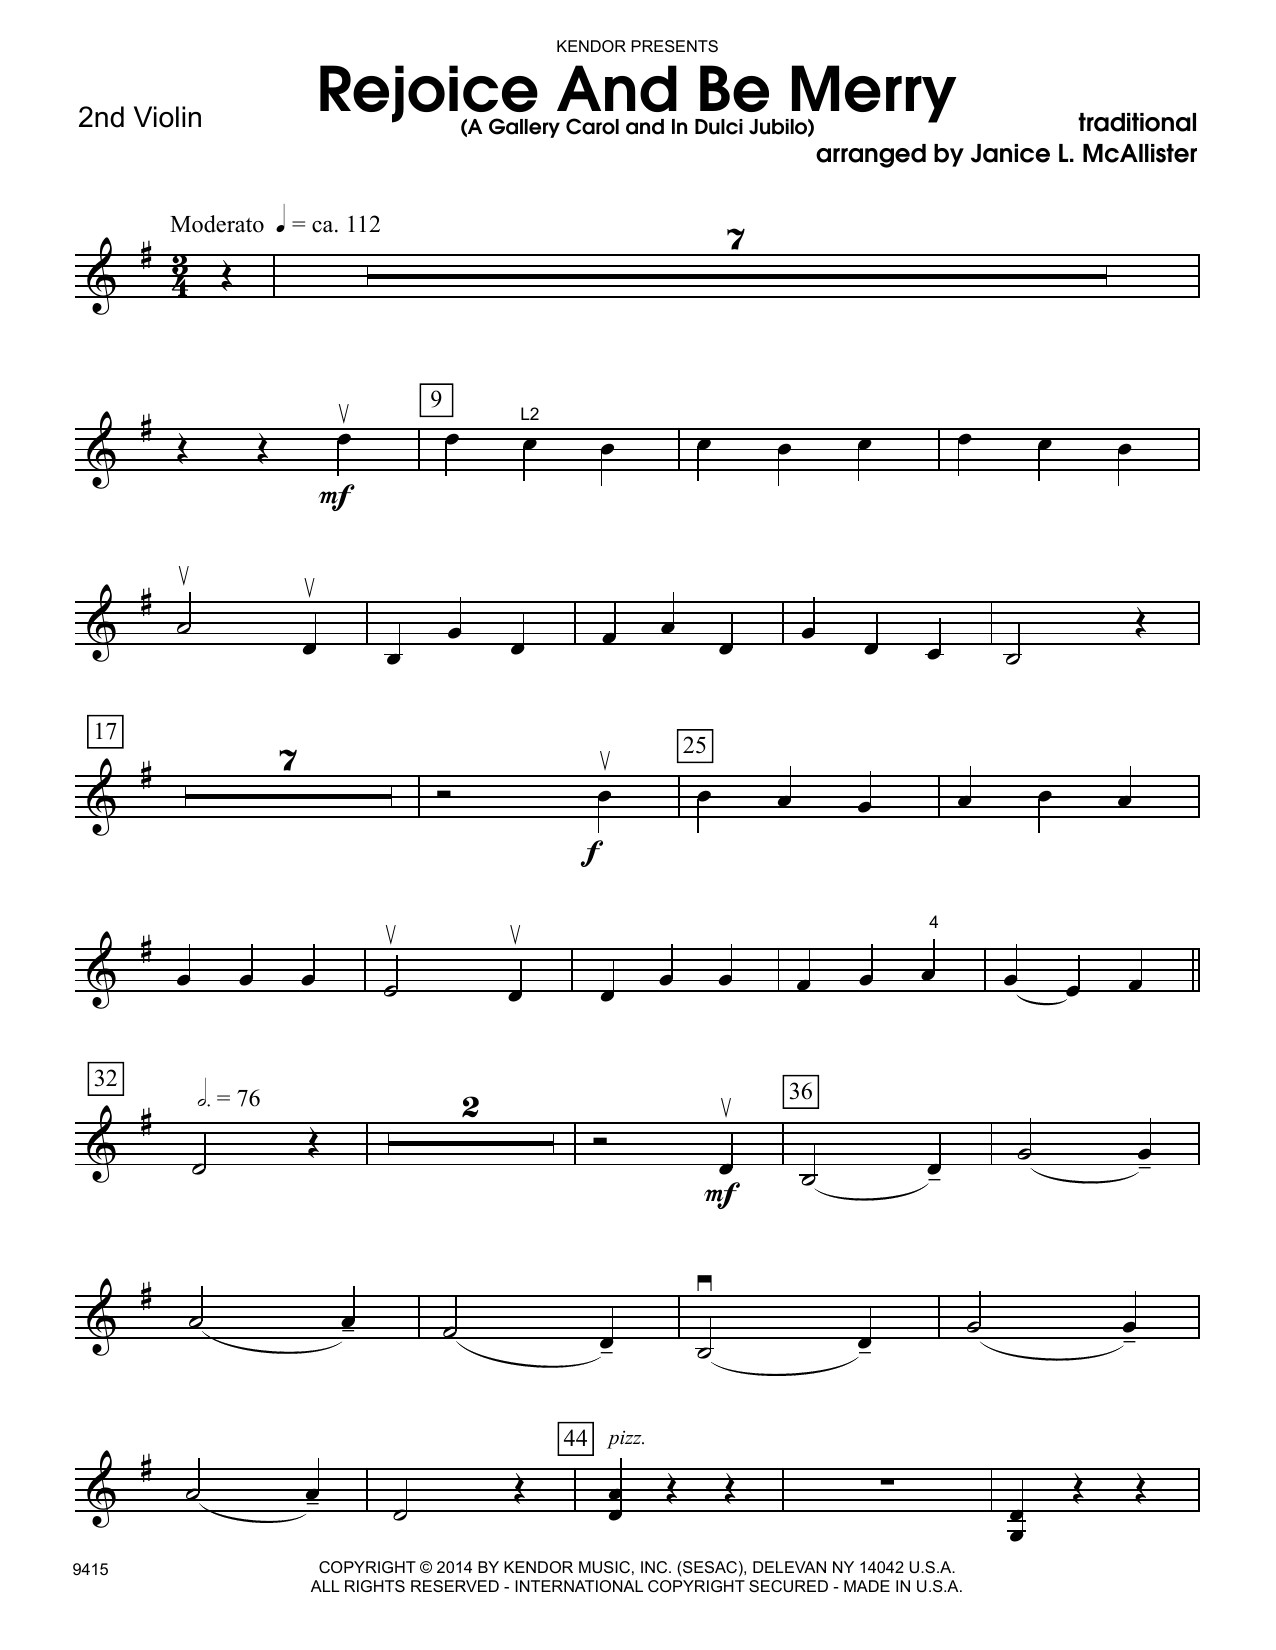 Download Janice L. McAllister Rejoice And Be Merry (A Gallery Carol a Sheet Music